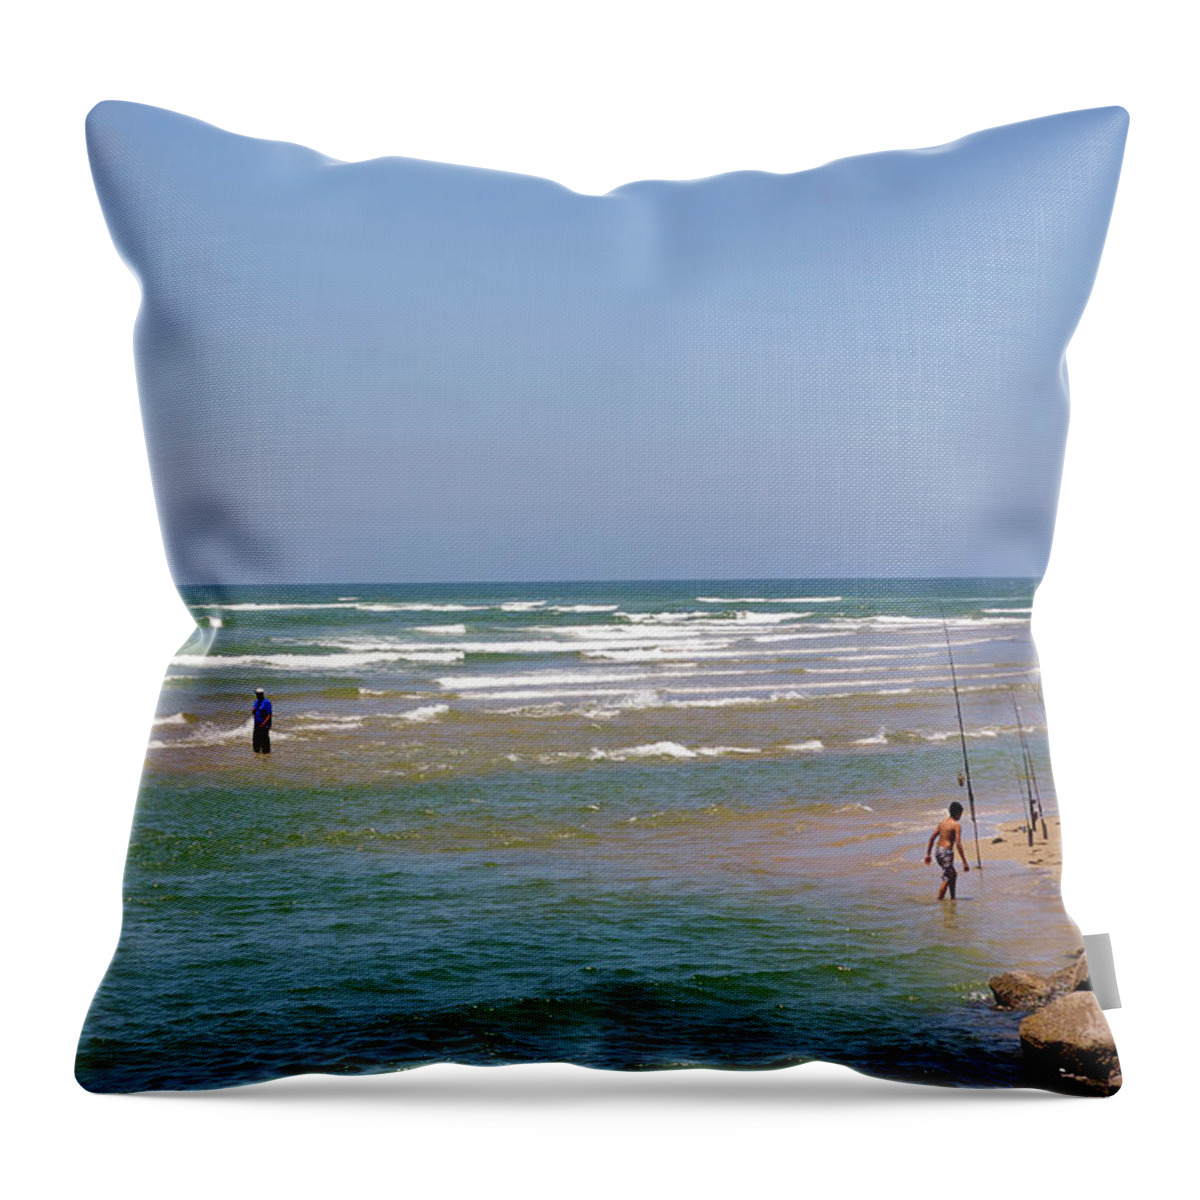 Child Throw Pillow featuring the photograph Men With Rods Ready To Catch Fish In by Barry Winiker